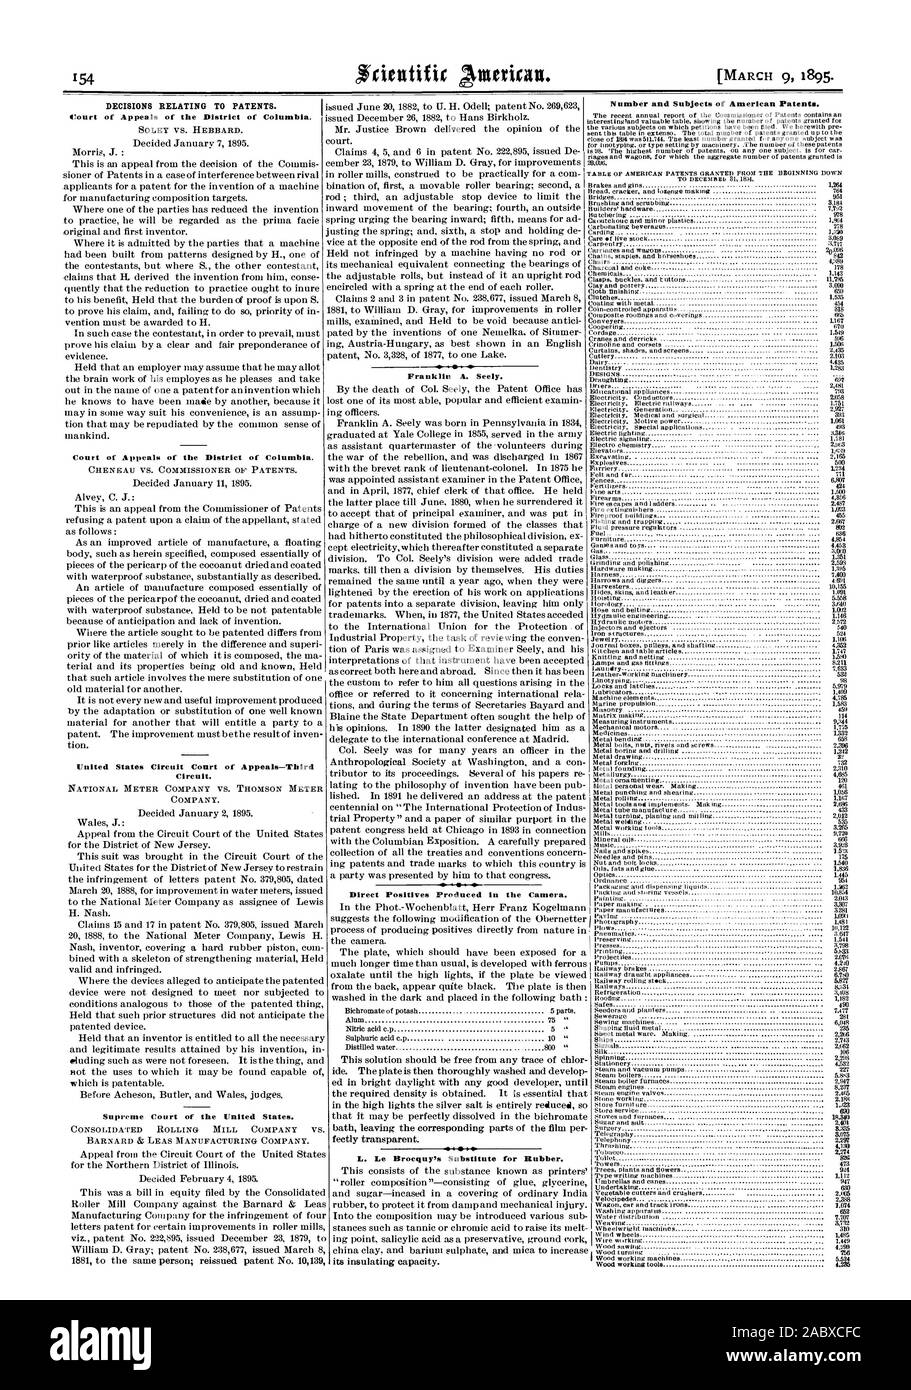 Number and Subjects of American Patents. DECISIONS RELATING TO PATENTS. Court of Appeals of the District of Columbia. SOLEY VS. HEBBARD. Court of Appeals of the District of Columbia. United States Circuit Court of Appeals-Third Circuit. NATIONAL METER COMPANY VS. THOMSON METER COMPANY. Supreme Court of the United States. CONSOLIDATED ROLLING MILL COMPANY VS. Franklin A. Seely. Direct Positives Produced in the Camera. L. Le Brocqurs Substitute for Rubber. 500 771 6.801, scientific american, 1895-03-09 Stock Photo